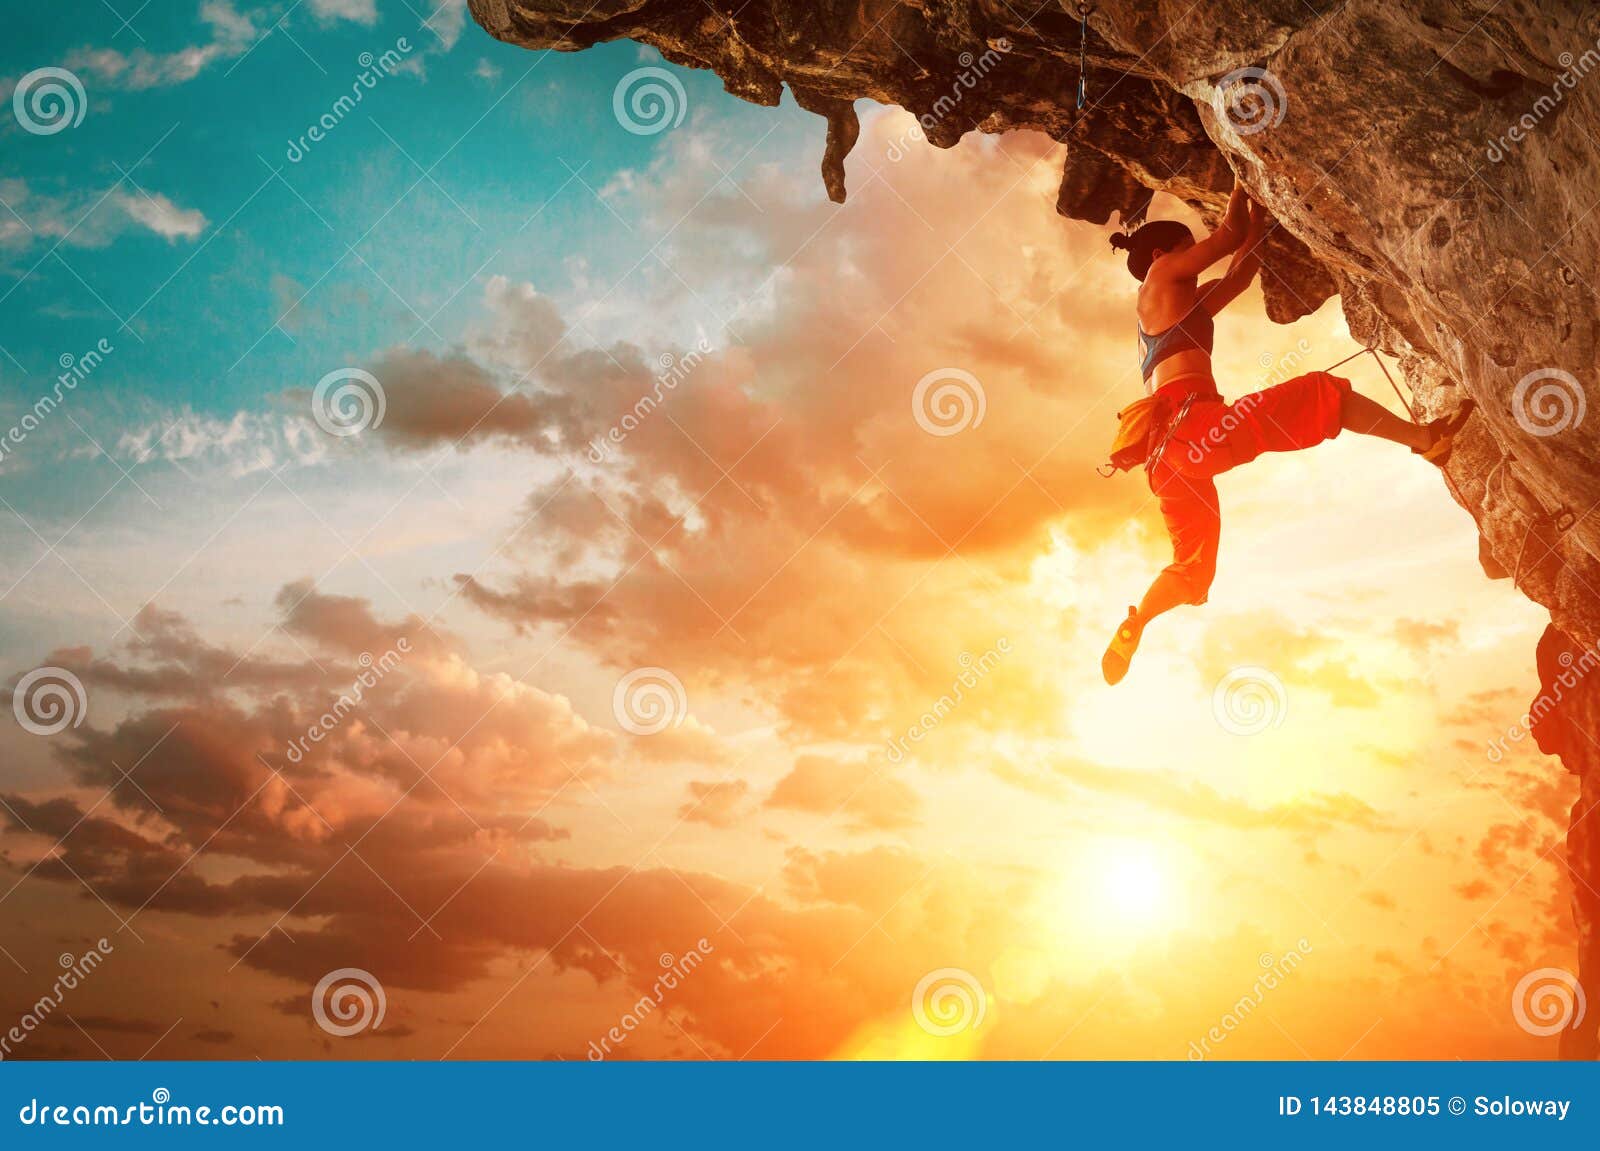 athletic woman climbing on overhanging cliff rock with sunset sky background